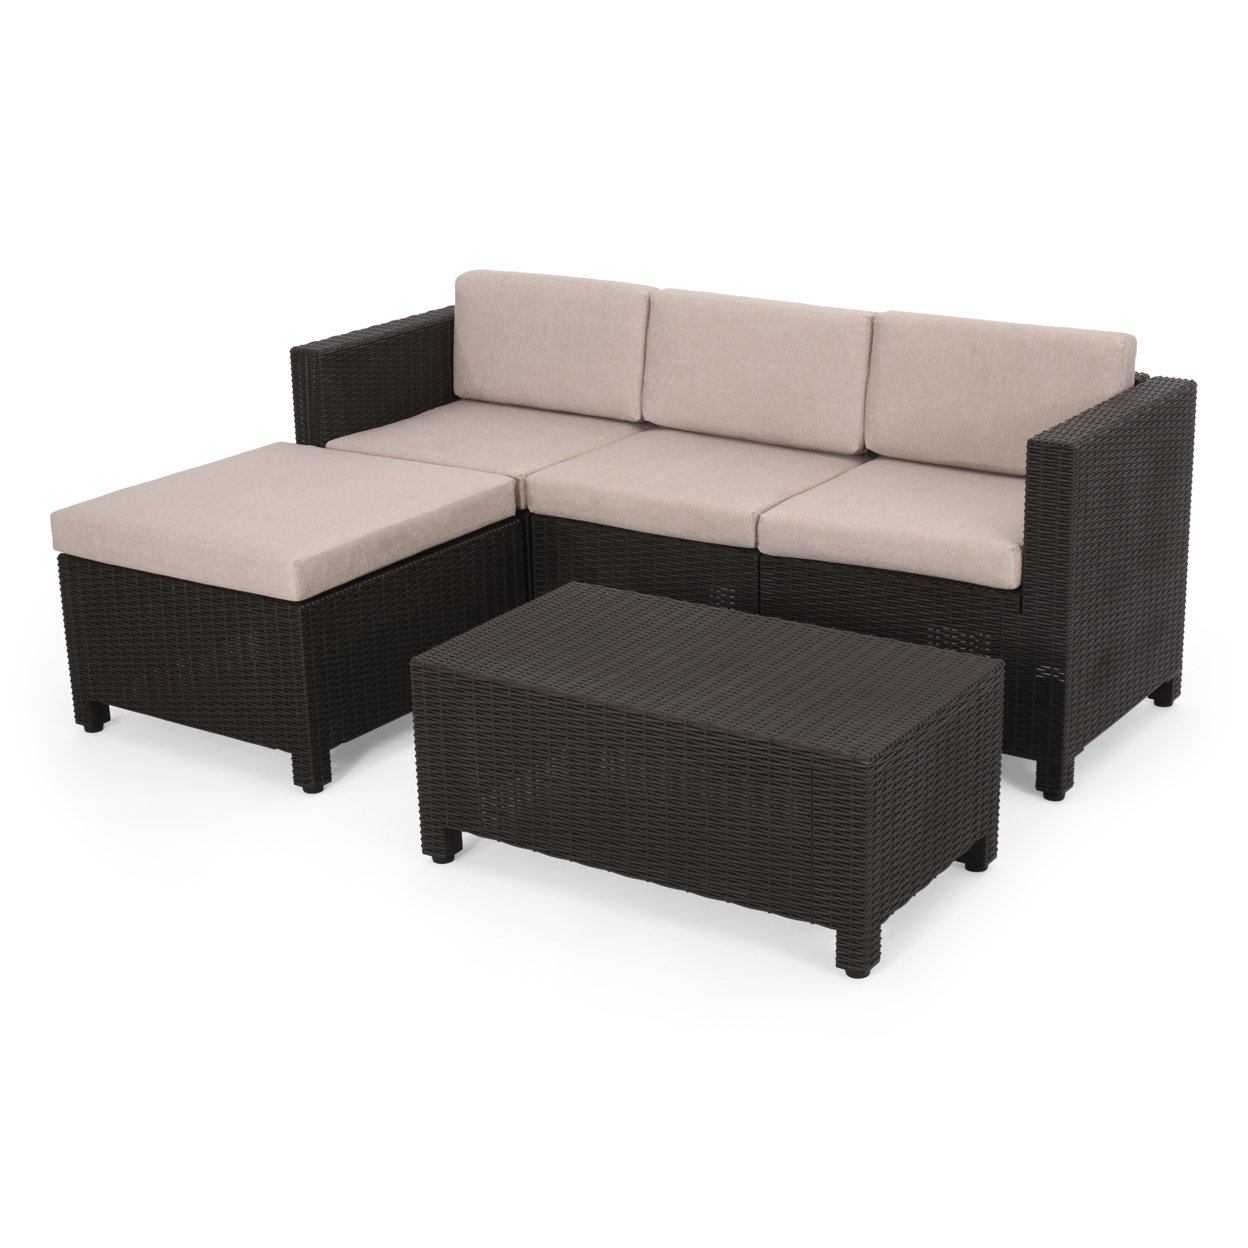 Odessa Outdoor Wicker 3 Seater Sectional Set With Ottoman - Dark Gray + Gray